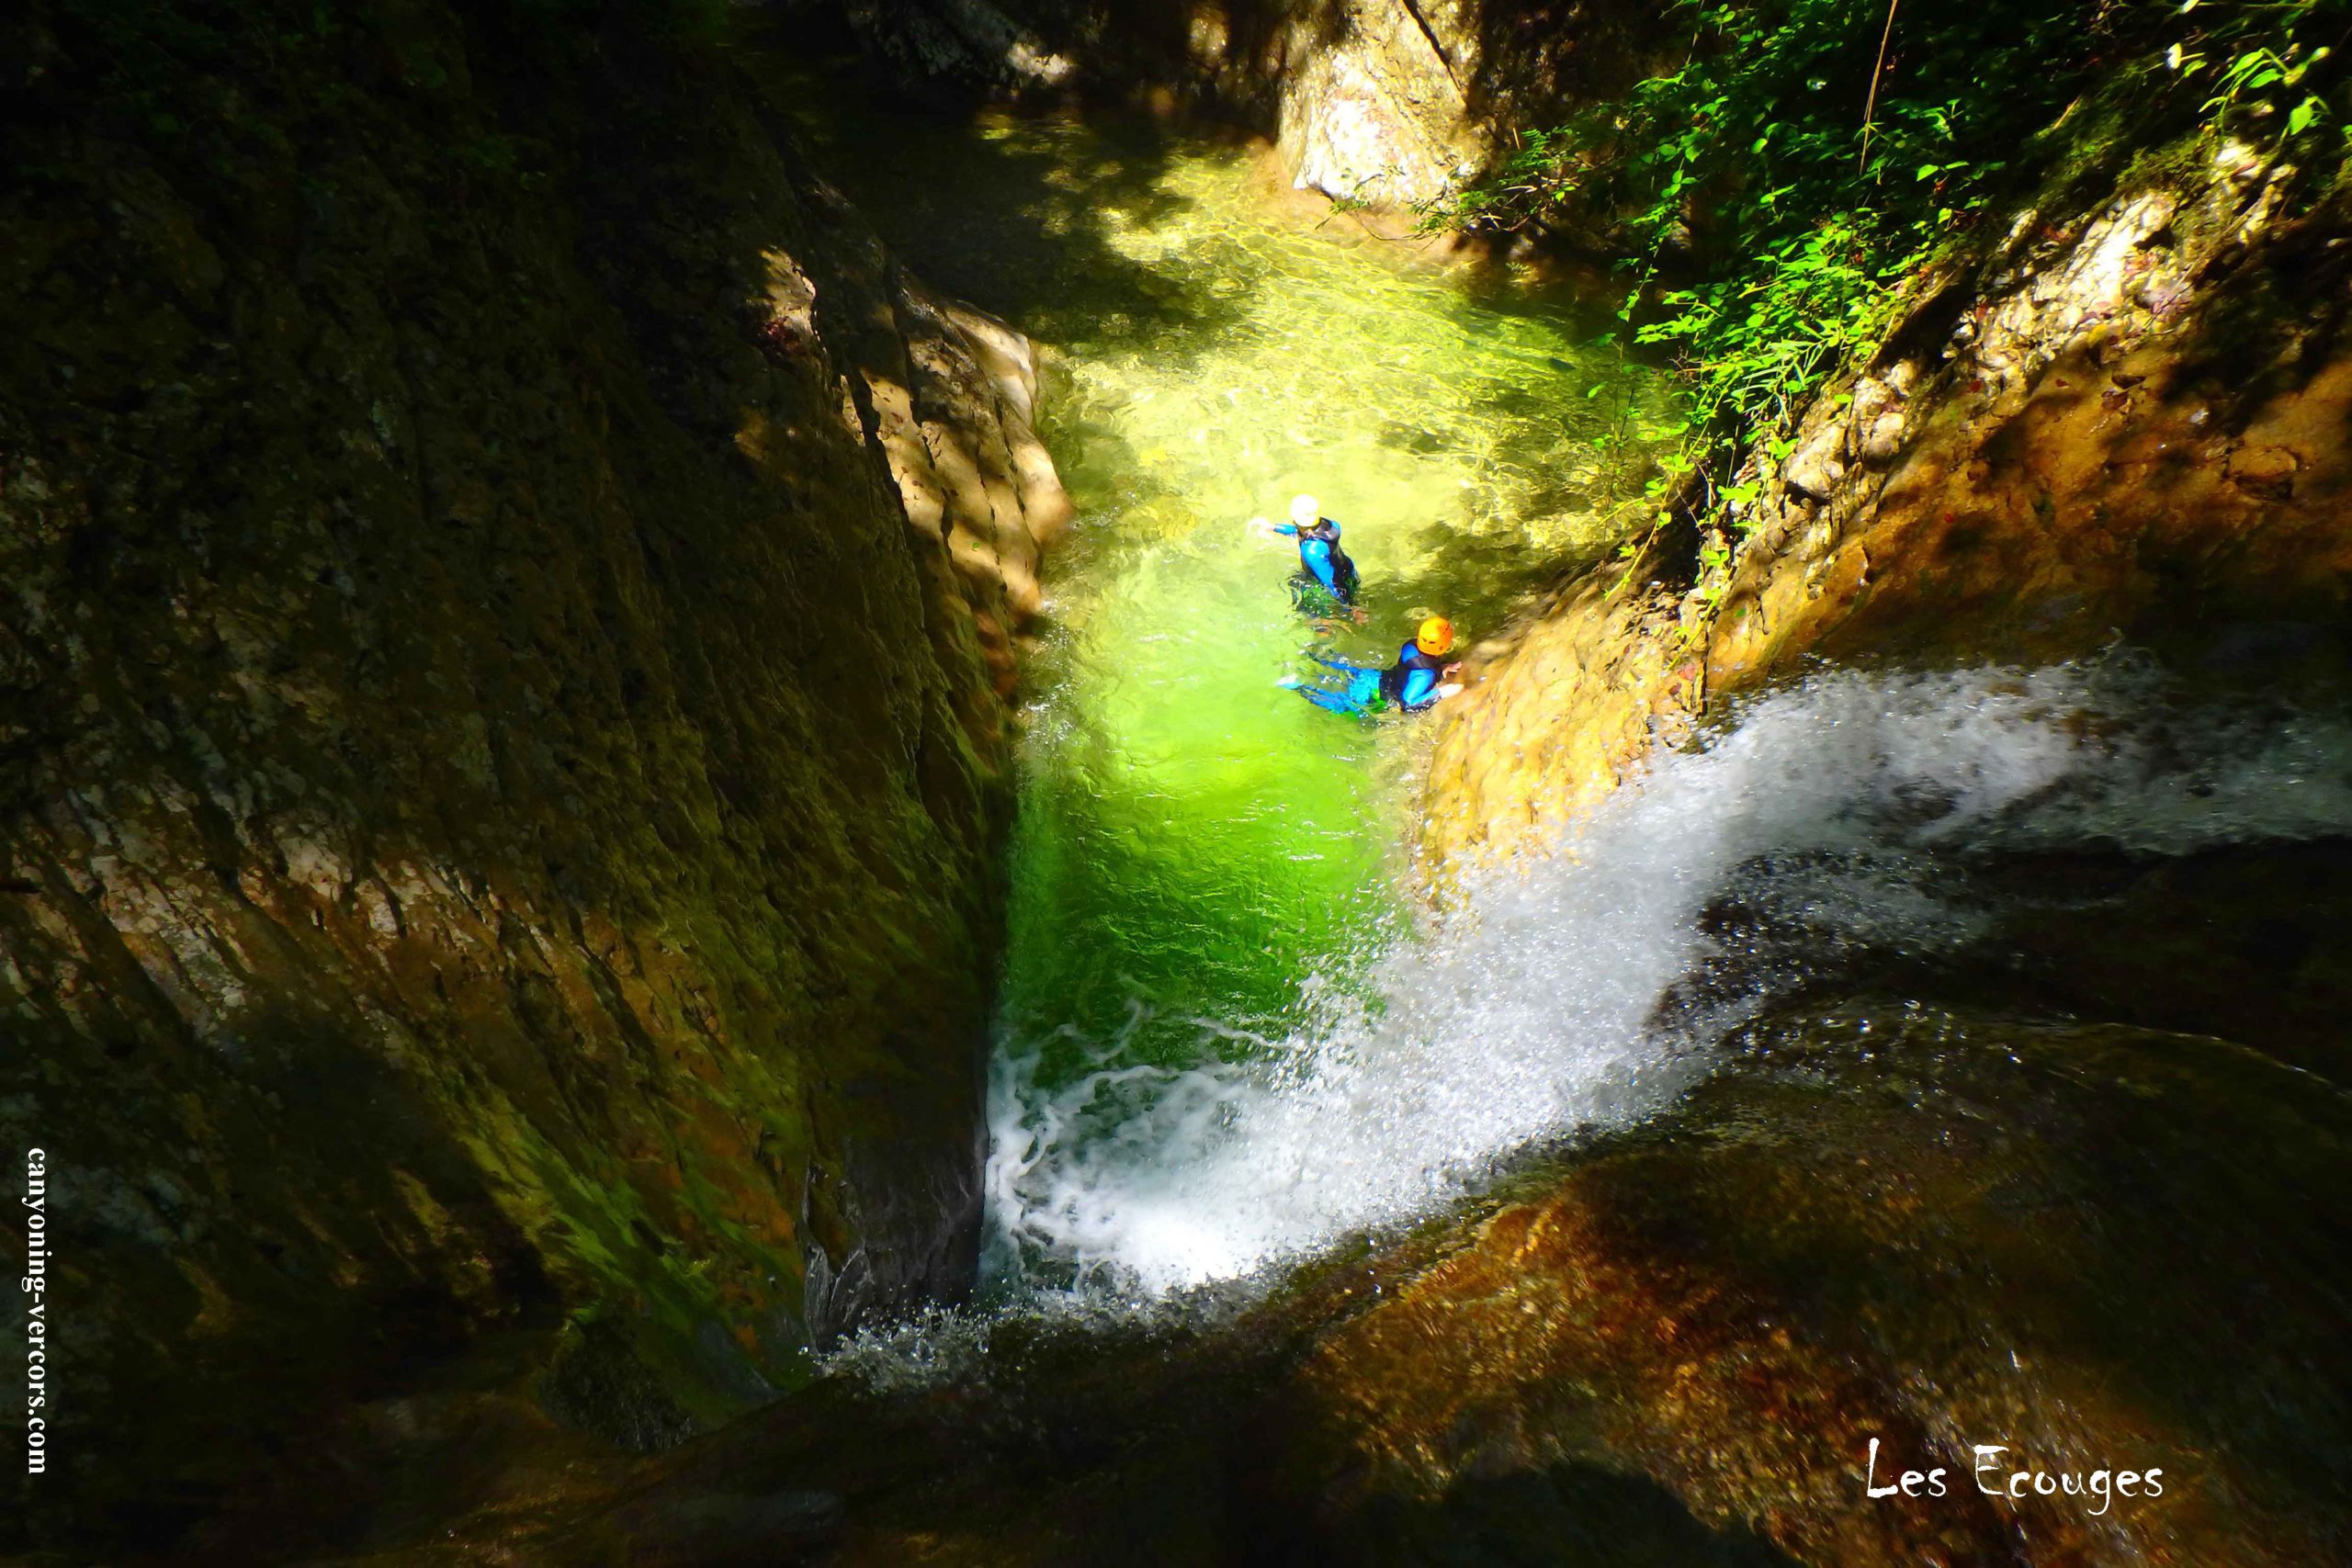 Canyoning Vercors Les Ecouges